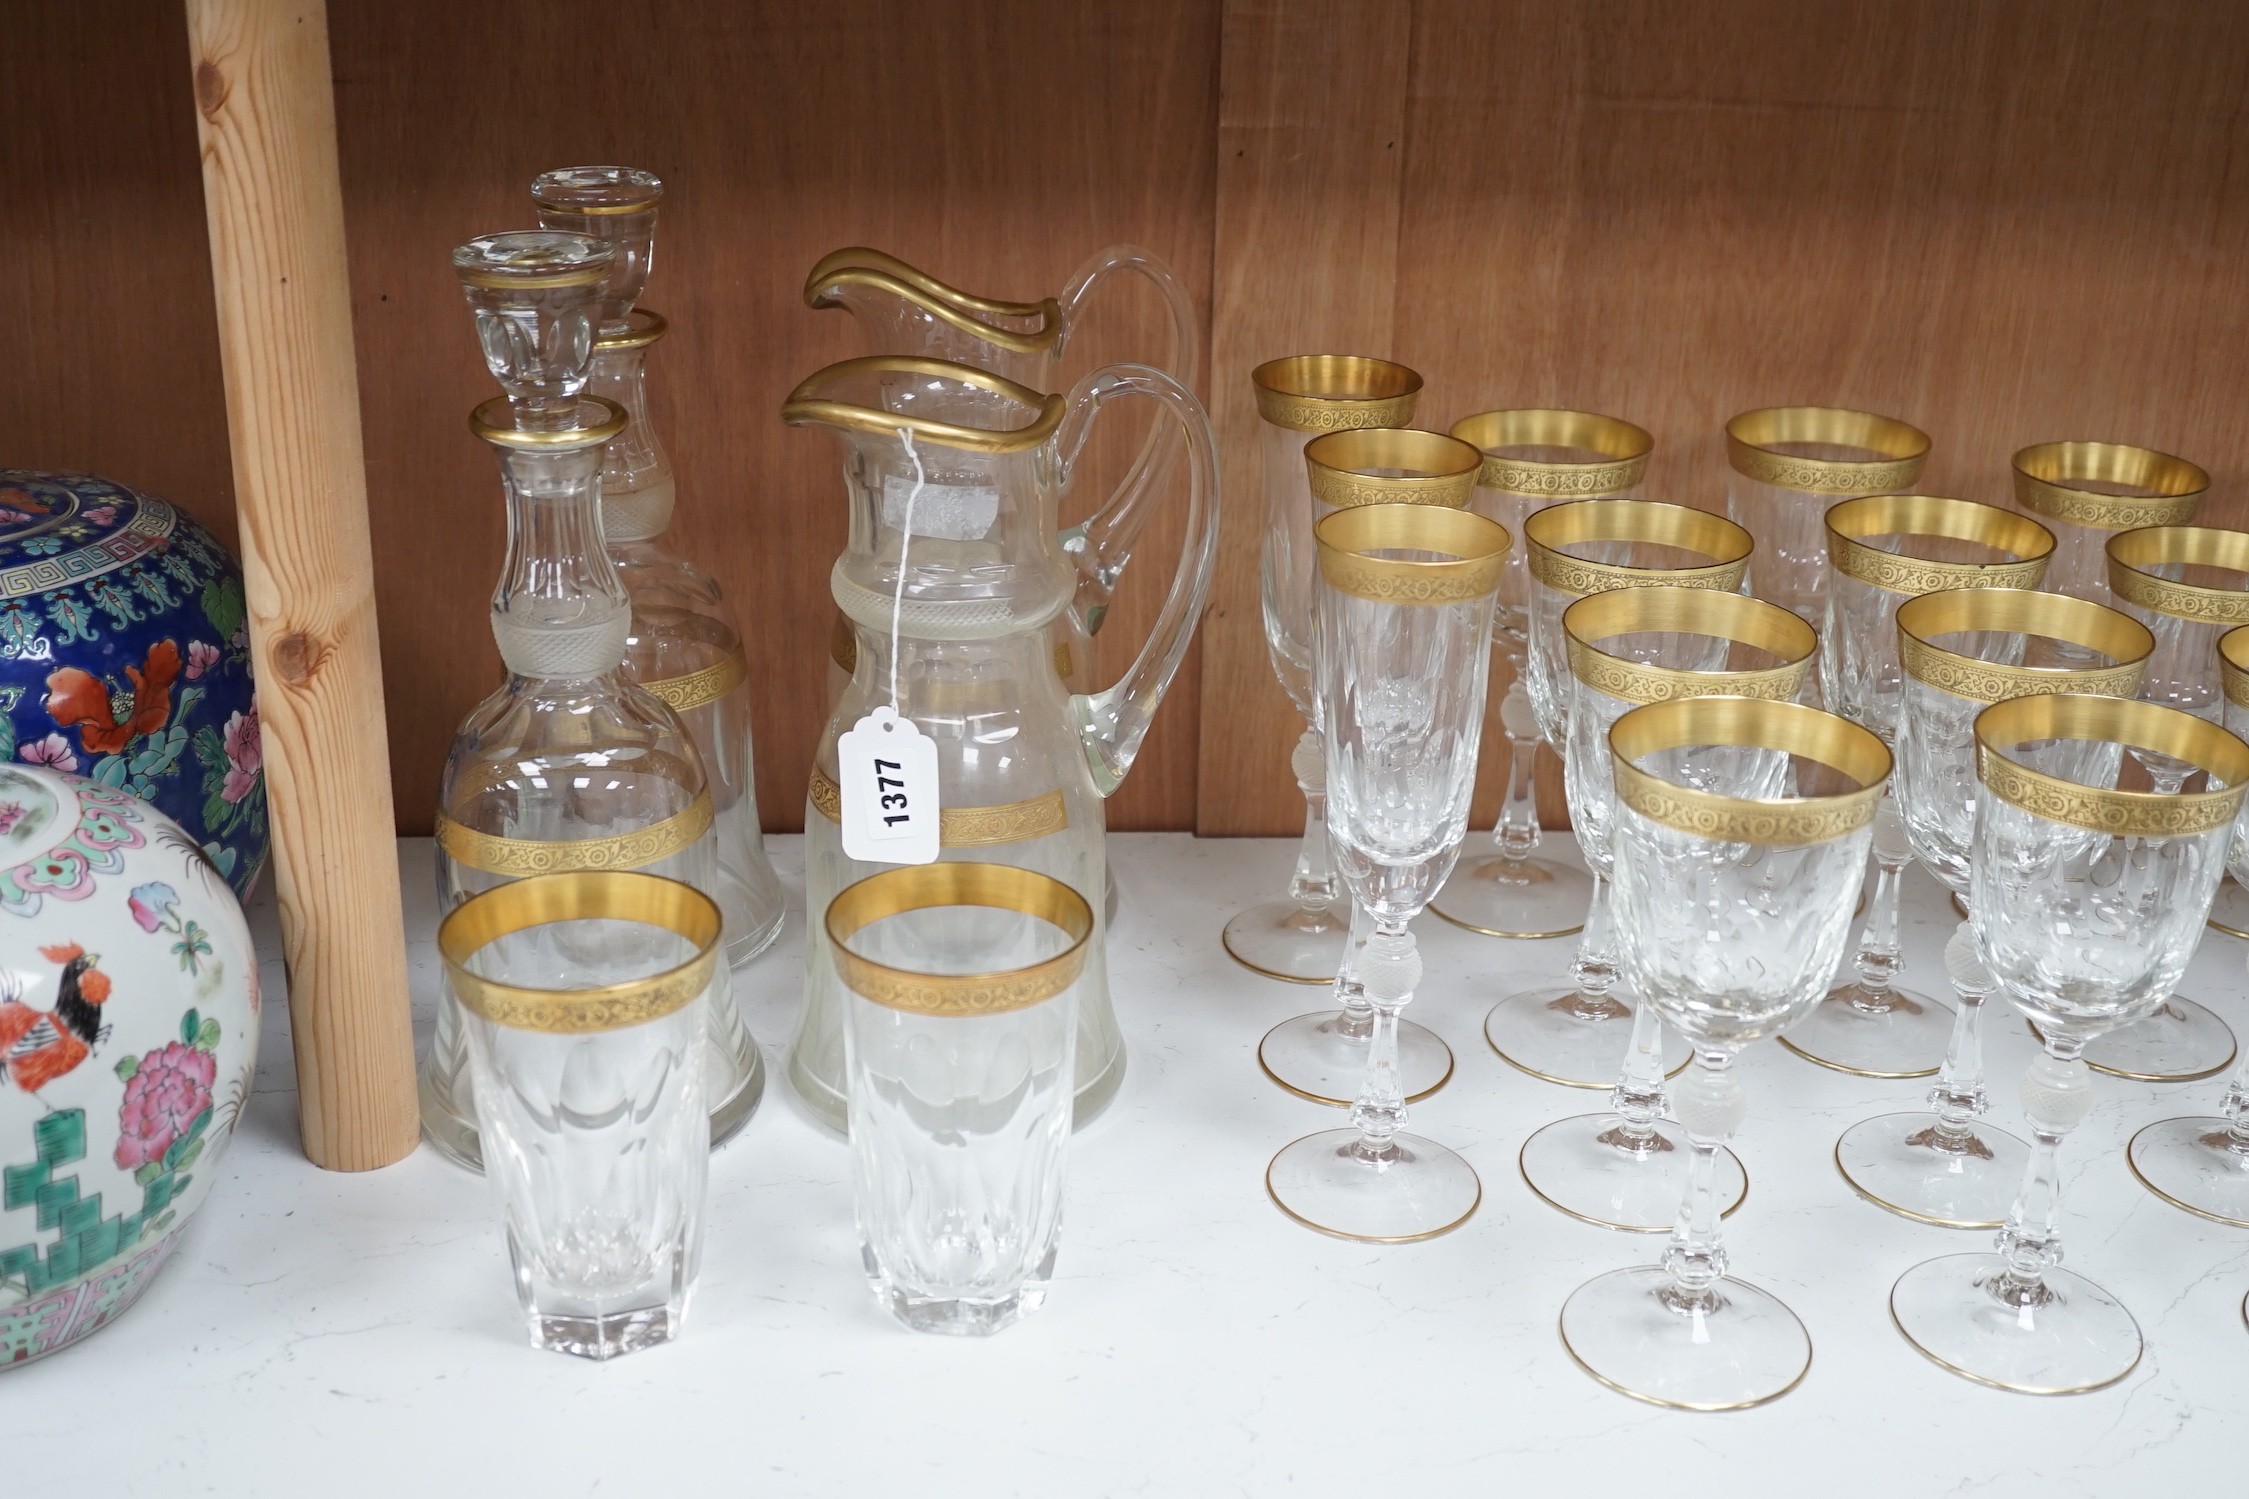 A Harrods retailed parcel gilt and cut and moulded suite of drinking glasses, two decanters and two carafes